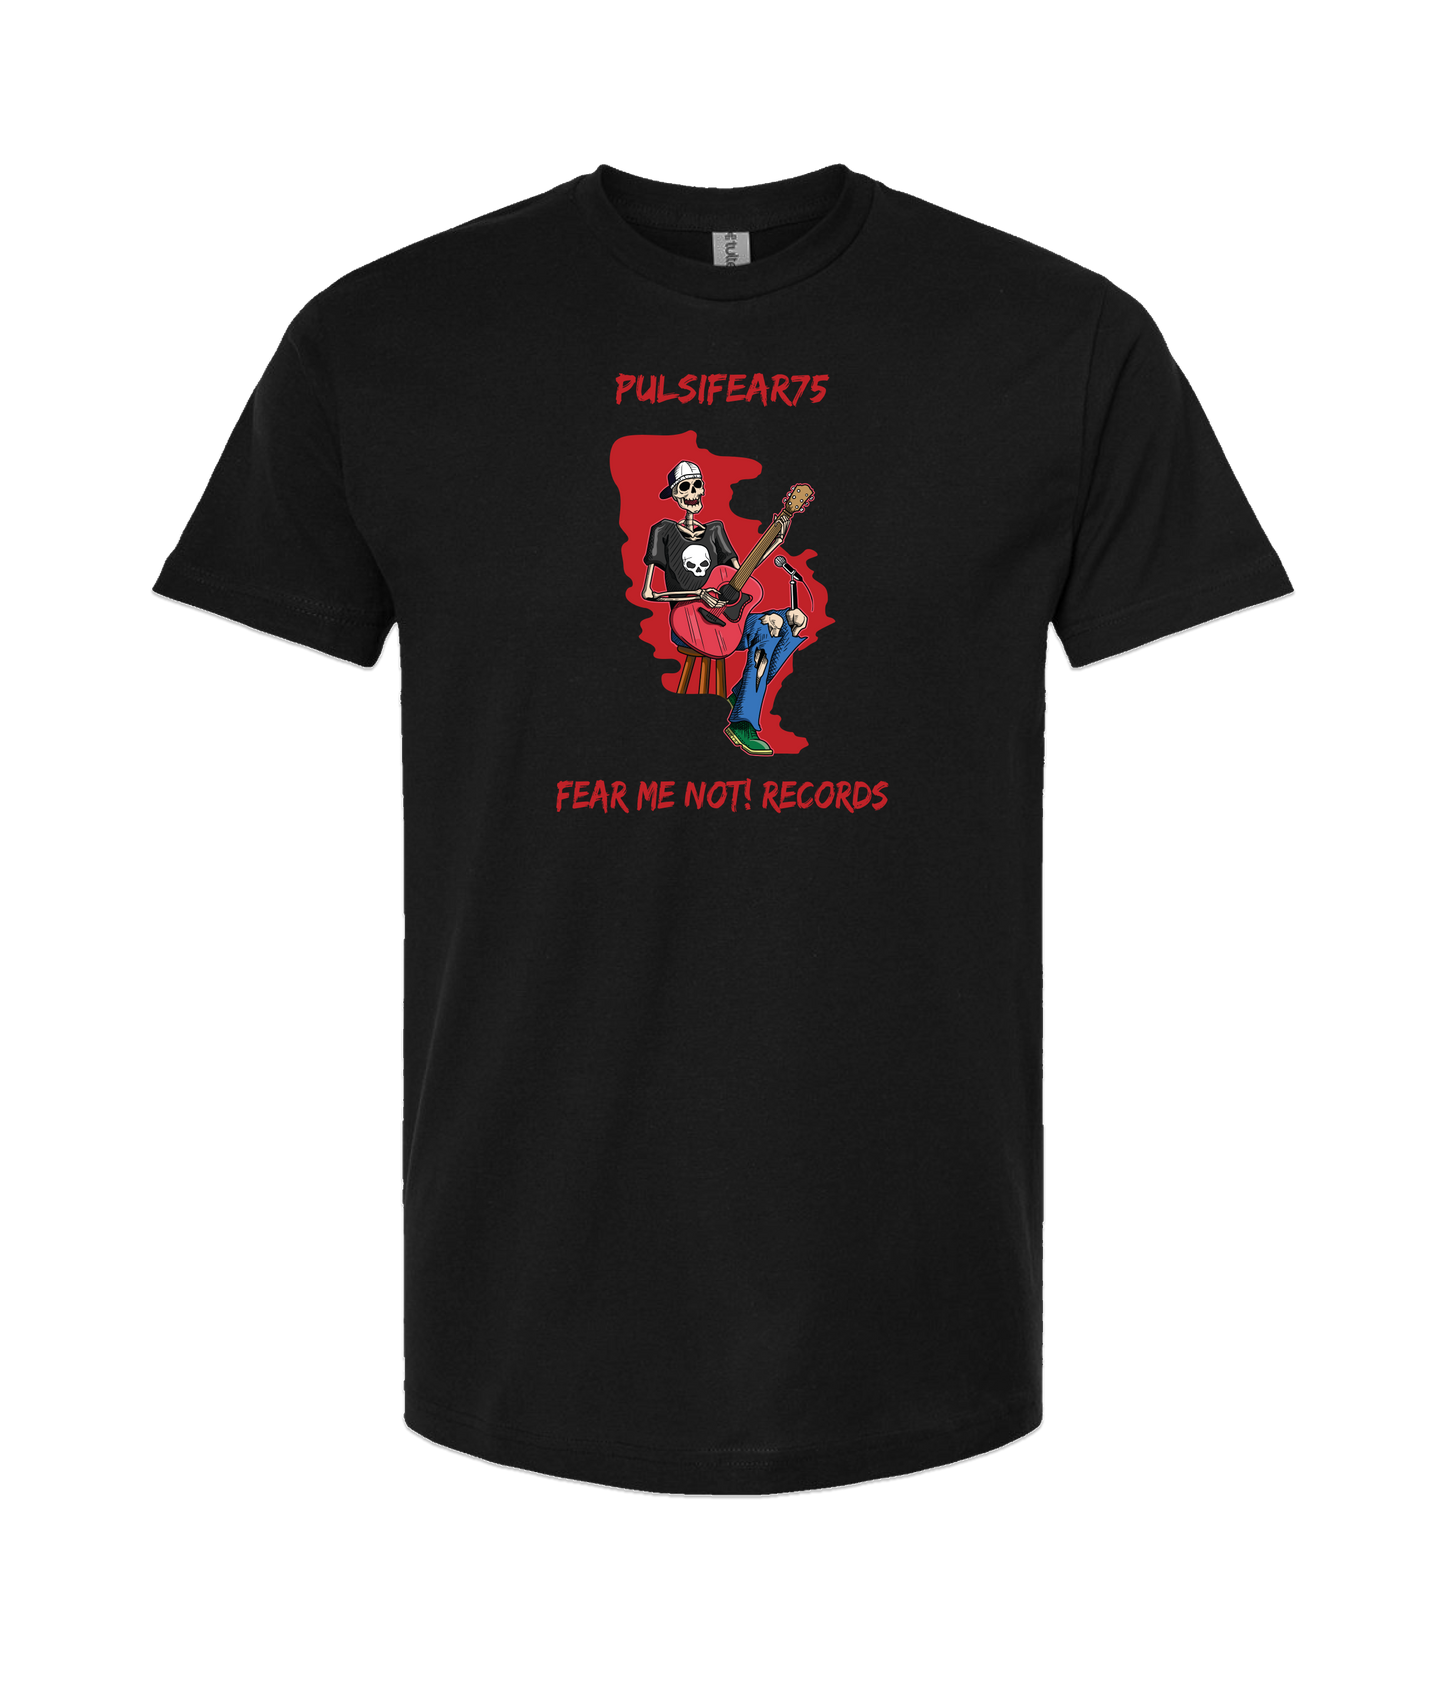 Mark Pulsipher Official - Fear Me Not! Records - Black T-Shirt